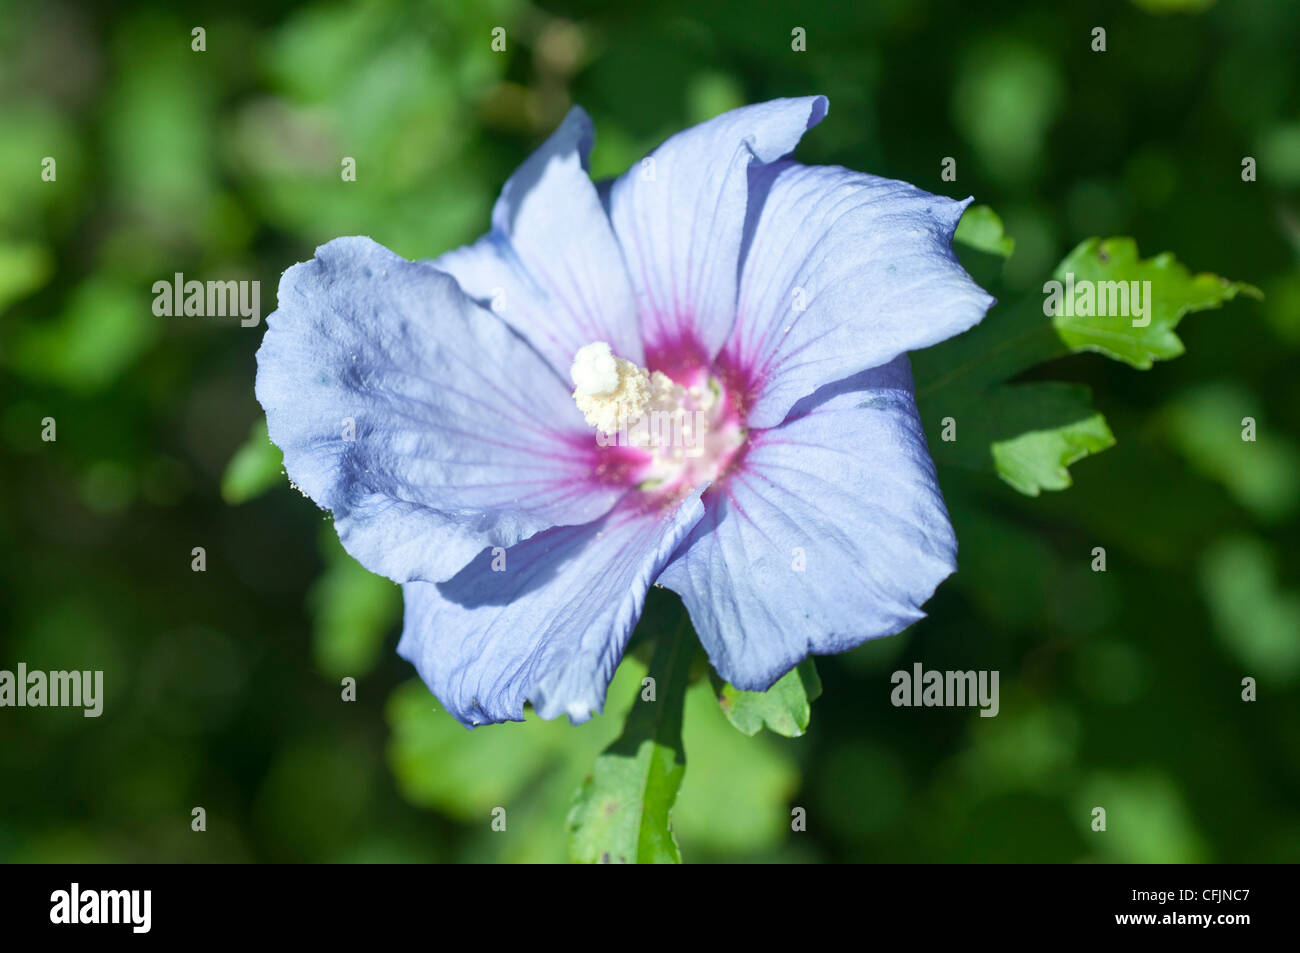 Pale blue white and violet flower of Hibiscus Syriacus shrub,  Rose of Sharon, Shrub Althea, Rose Althea, Malvaceae Stock Photo